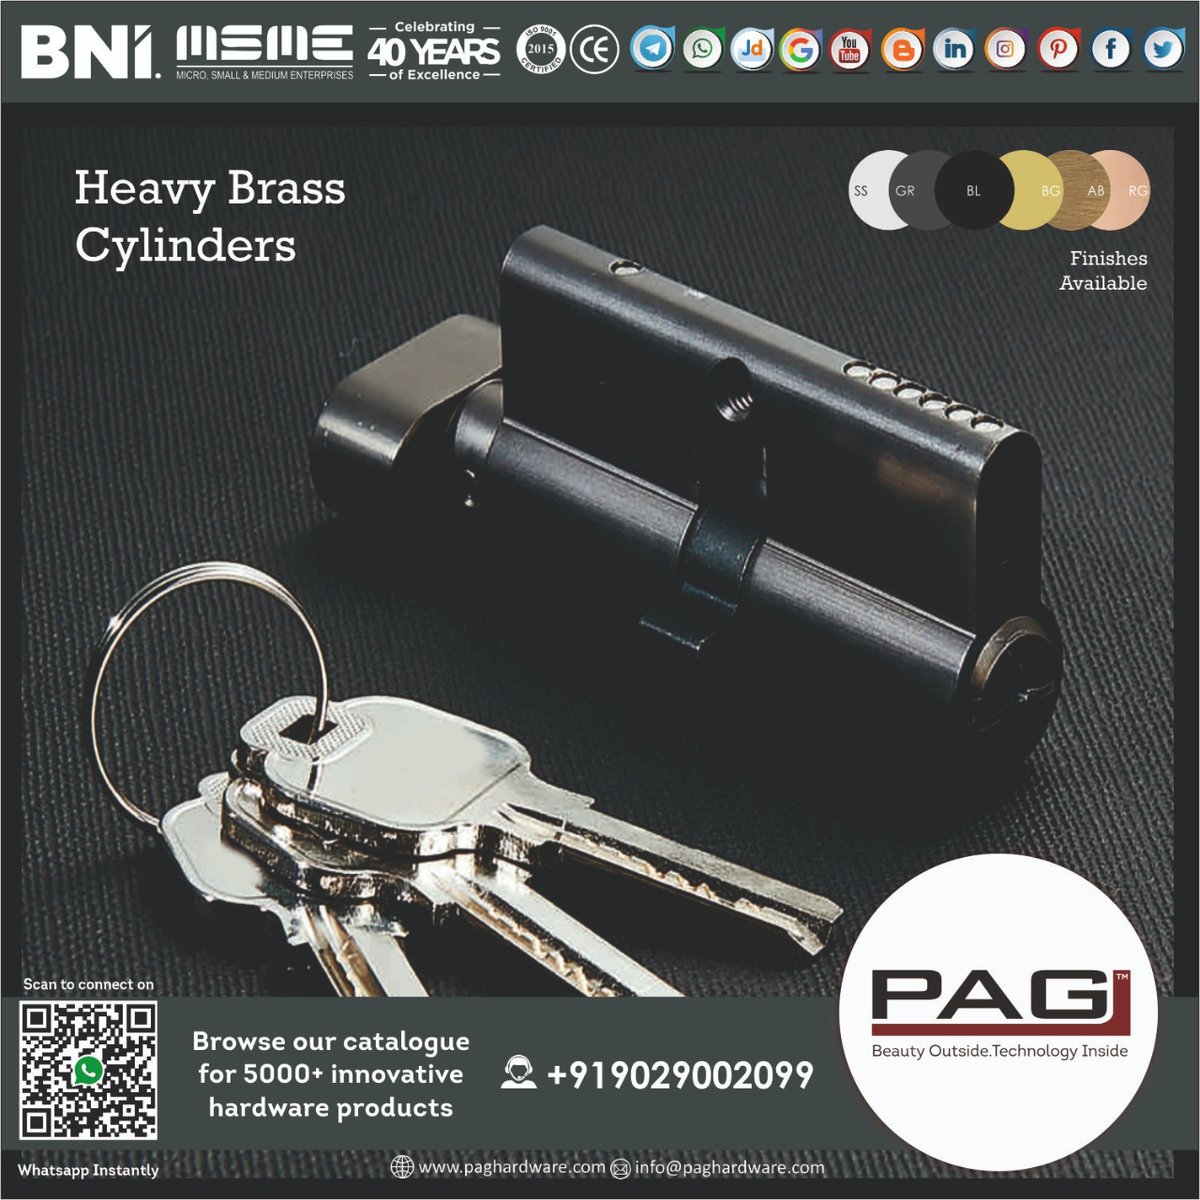 Presenting High Quality Brass Key & Keyless Cylinders for your Doors. #doormanufacturers #architecture #paghardware #interiors #homeimprovement #homeimprovement